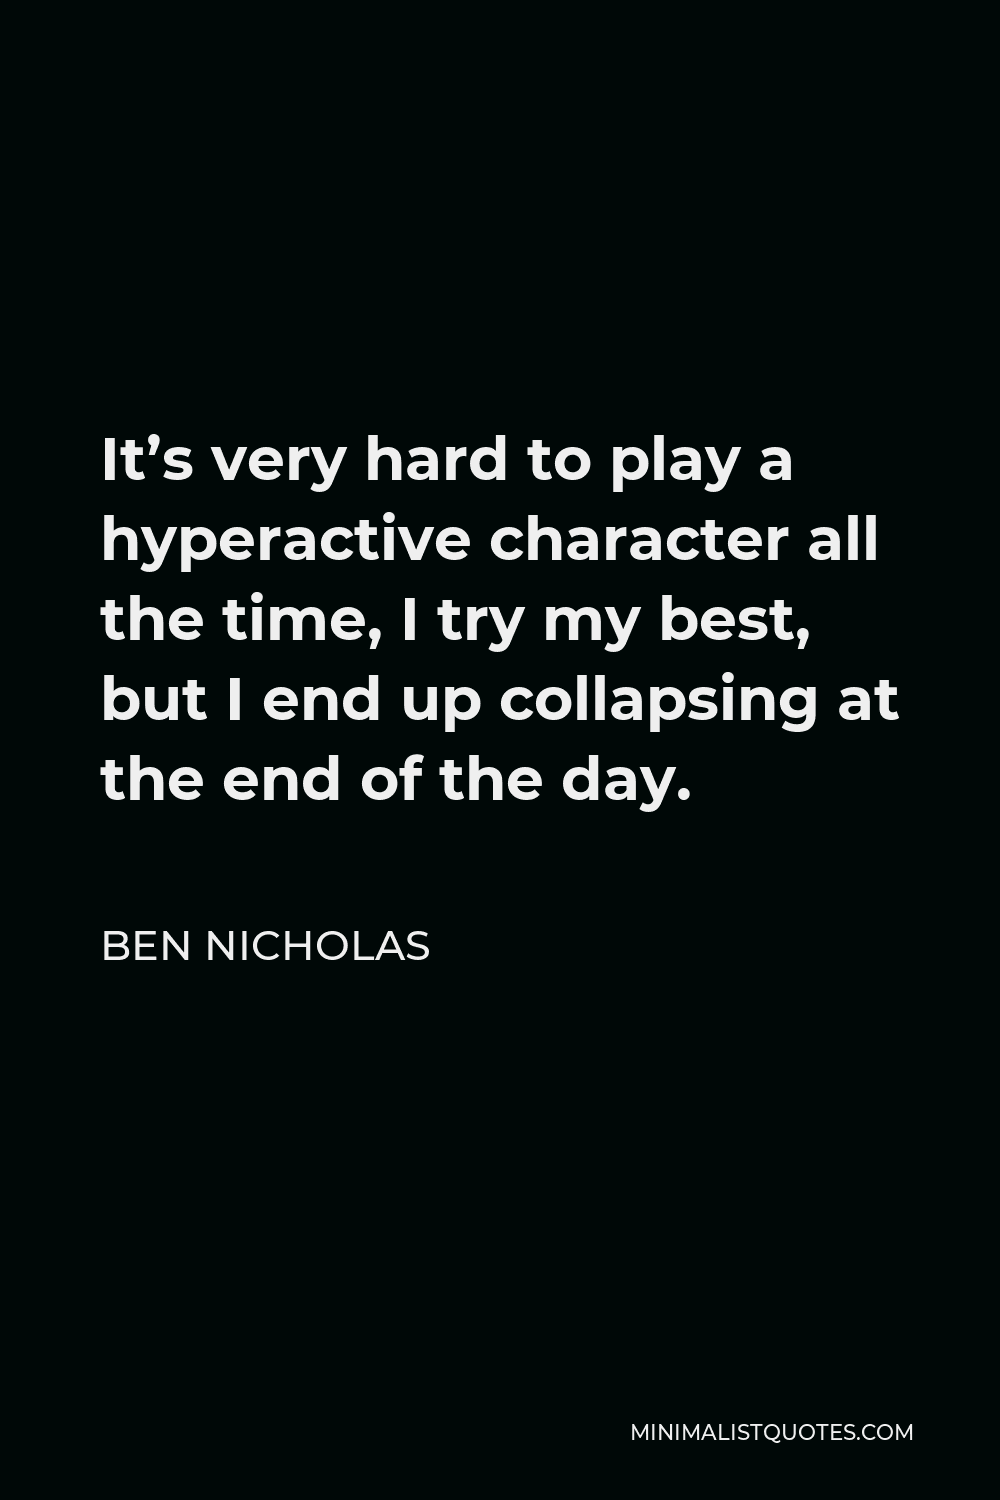 Ben Nicholas Quote - It’s very hard to play a hyperactive character all the time, I try my best, but I end up collapsing at the end of the day.